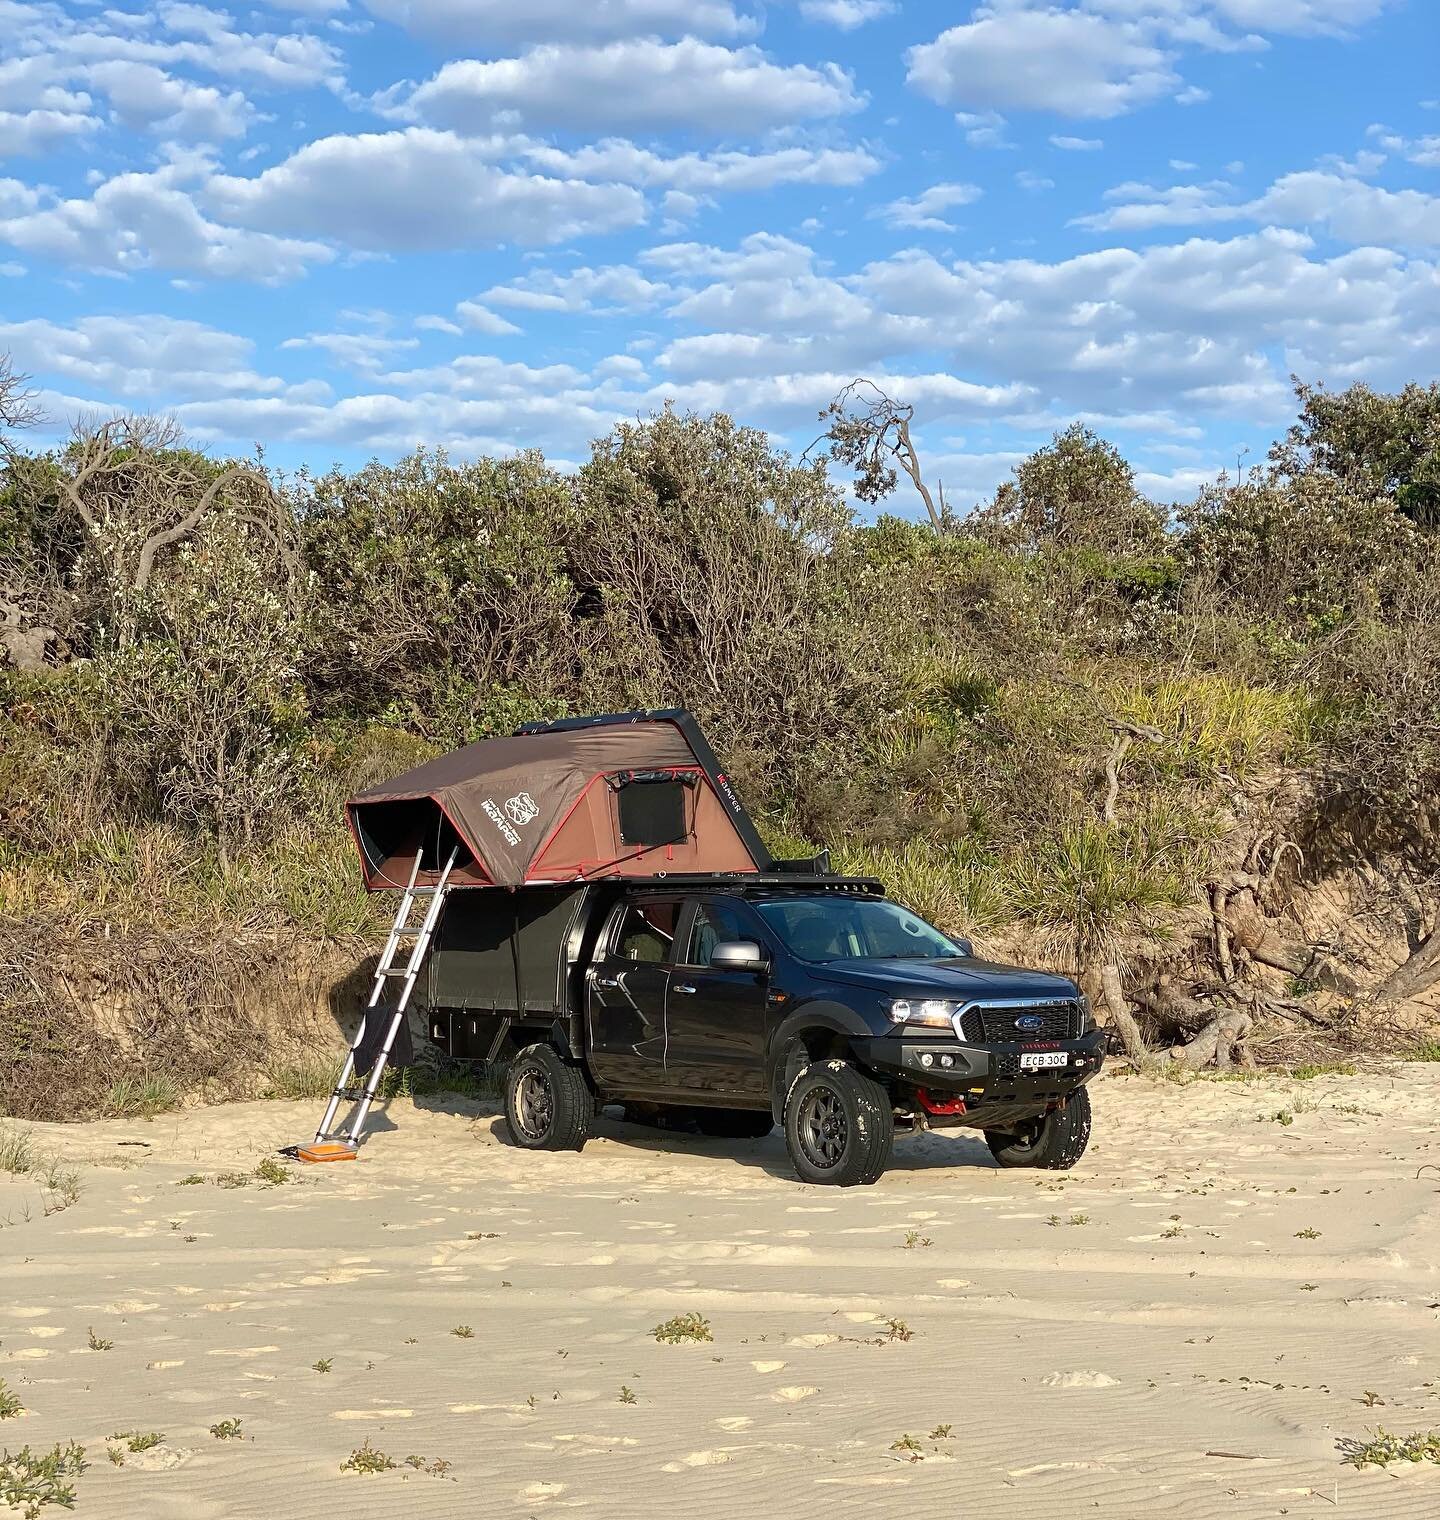 Dreaming about waking up with the ocean at your door step 💭 Hire now&hellip; 
-
-
-

#ec4campers #beachcamping  #eastcoastaustralia #adventure #roadtripaustralia #camperhire  #travelaustralia #4wd #visitnsw #thelegendarypacificcoast